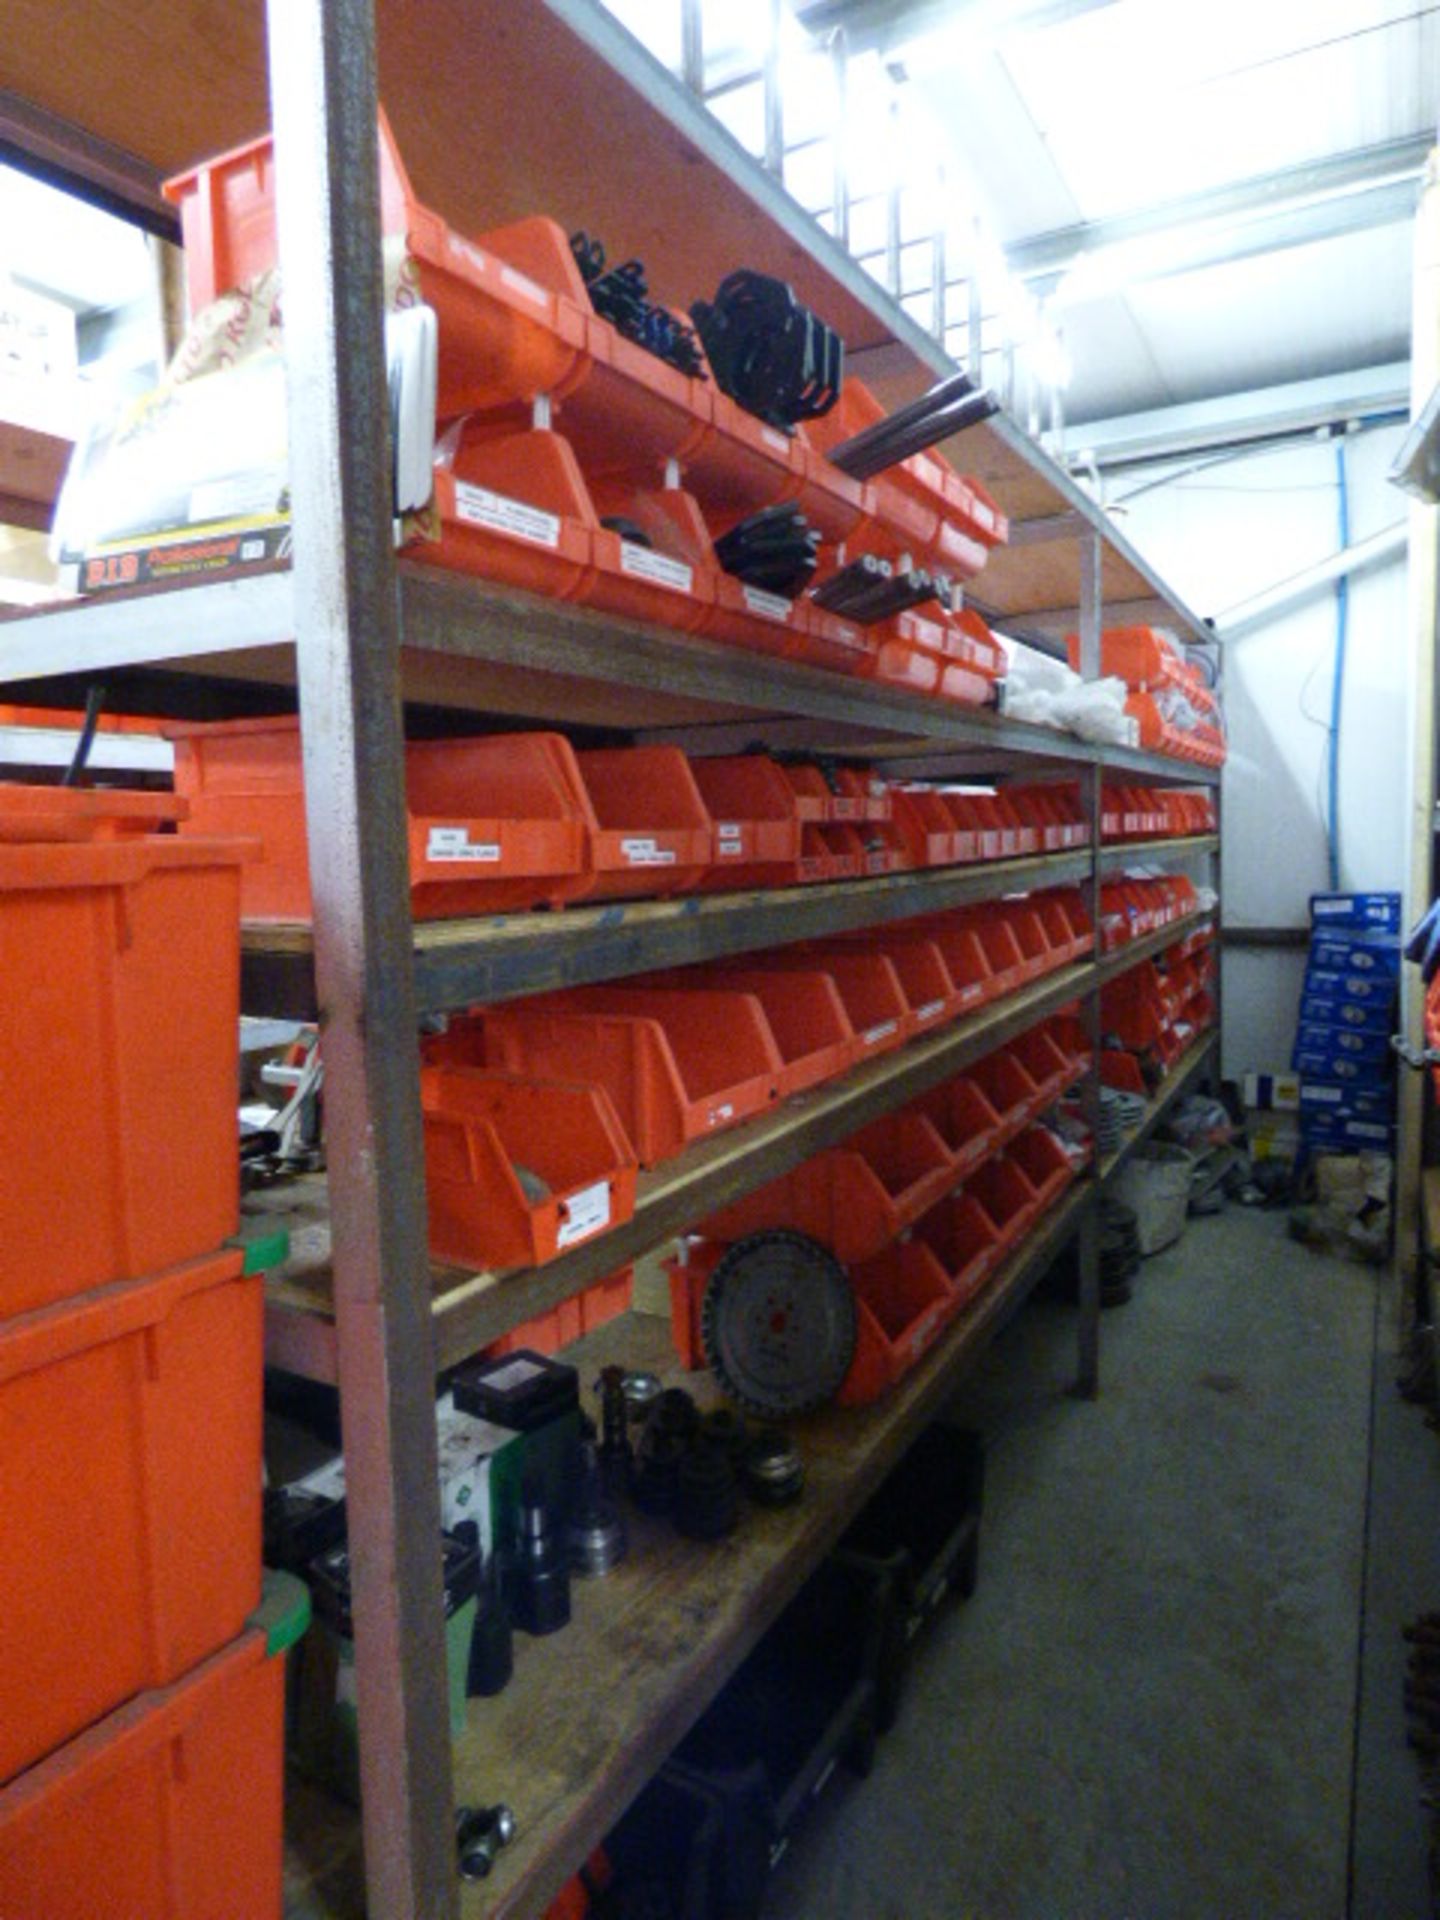 *2 Bays of Fabricated Storage Shelving containing Various CV Joints - Drive Shafts - Aluminium Hubbs